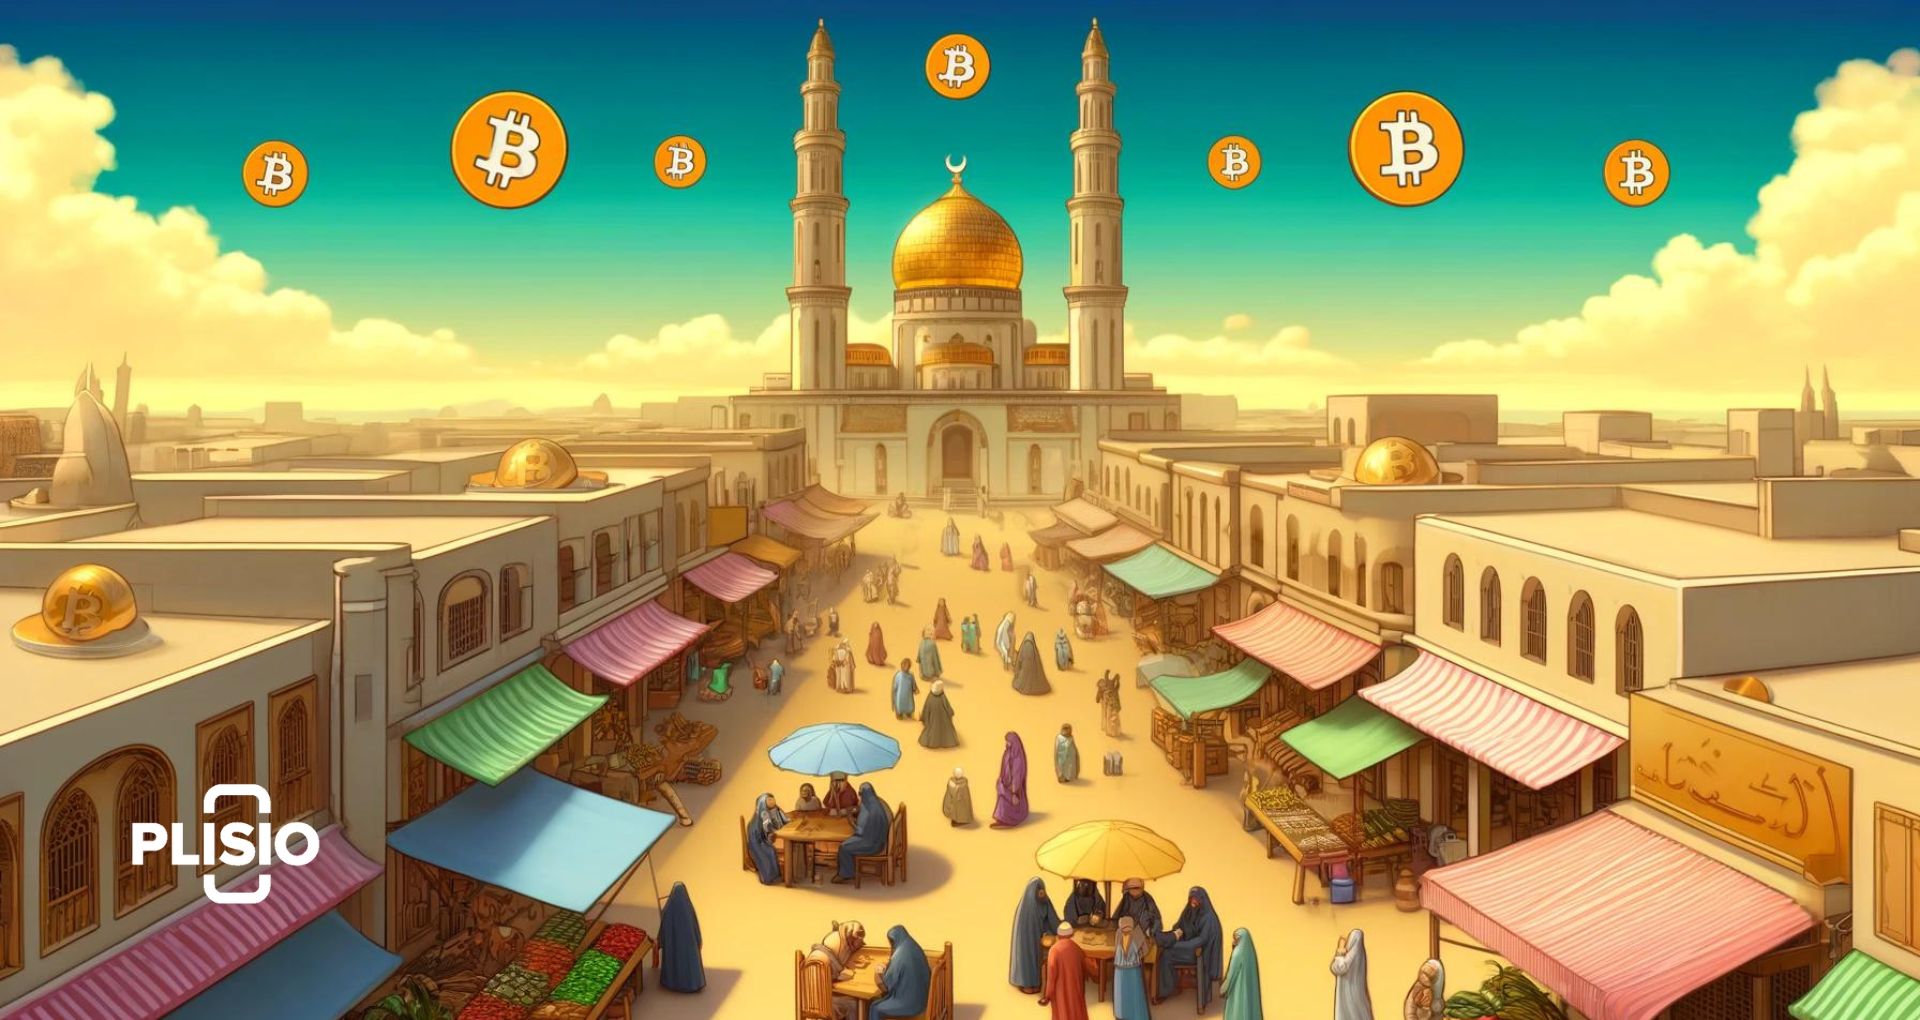 Is Bitcoin Halal? Where Does Cryptocurrency Stand in the Muslim World?